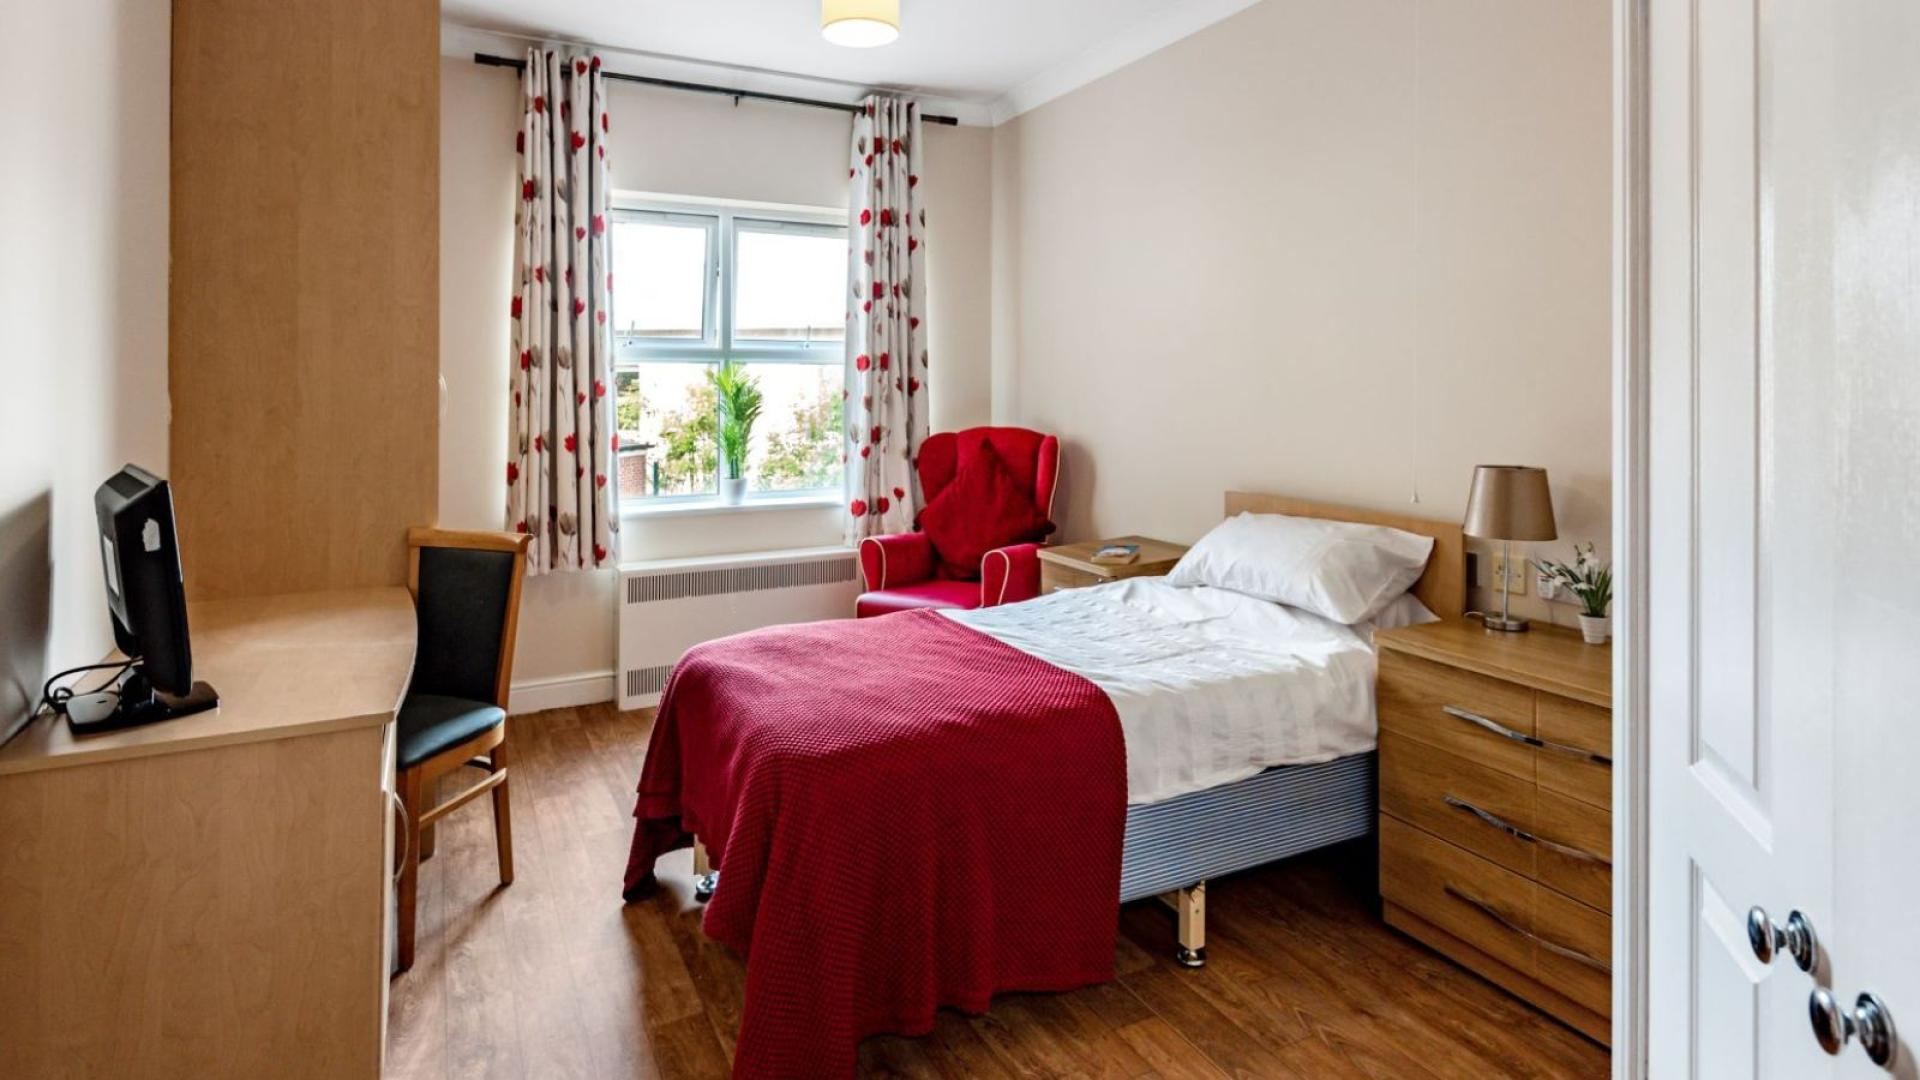 Spacious bedroom at Nesfield Lodge Dementia Care Home in Leeds